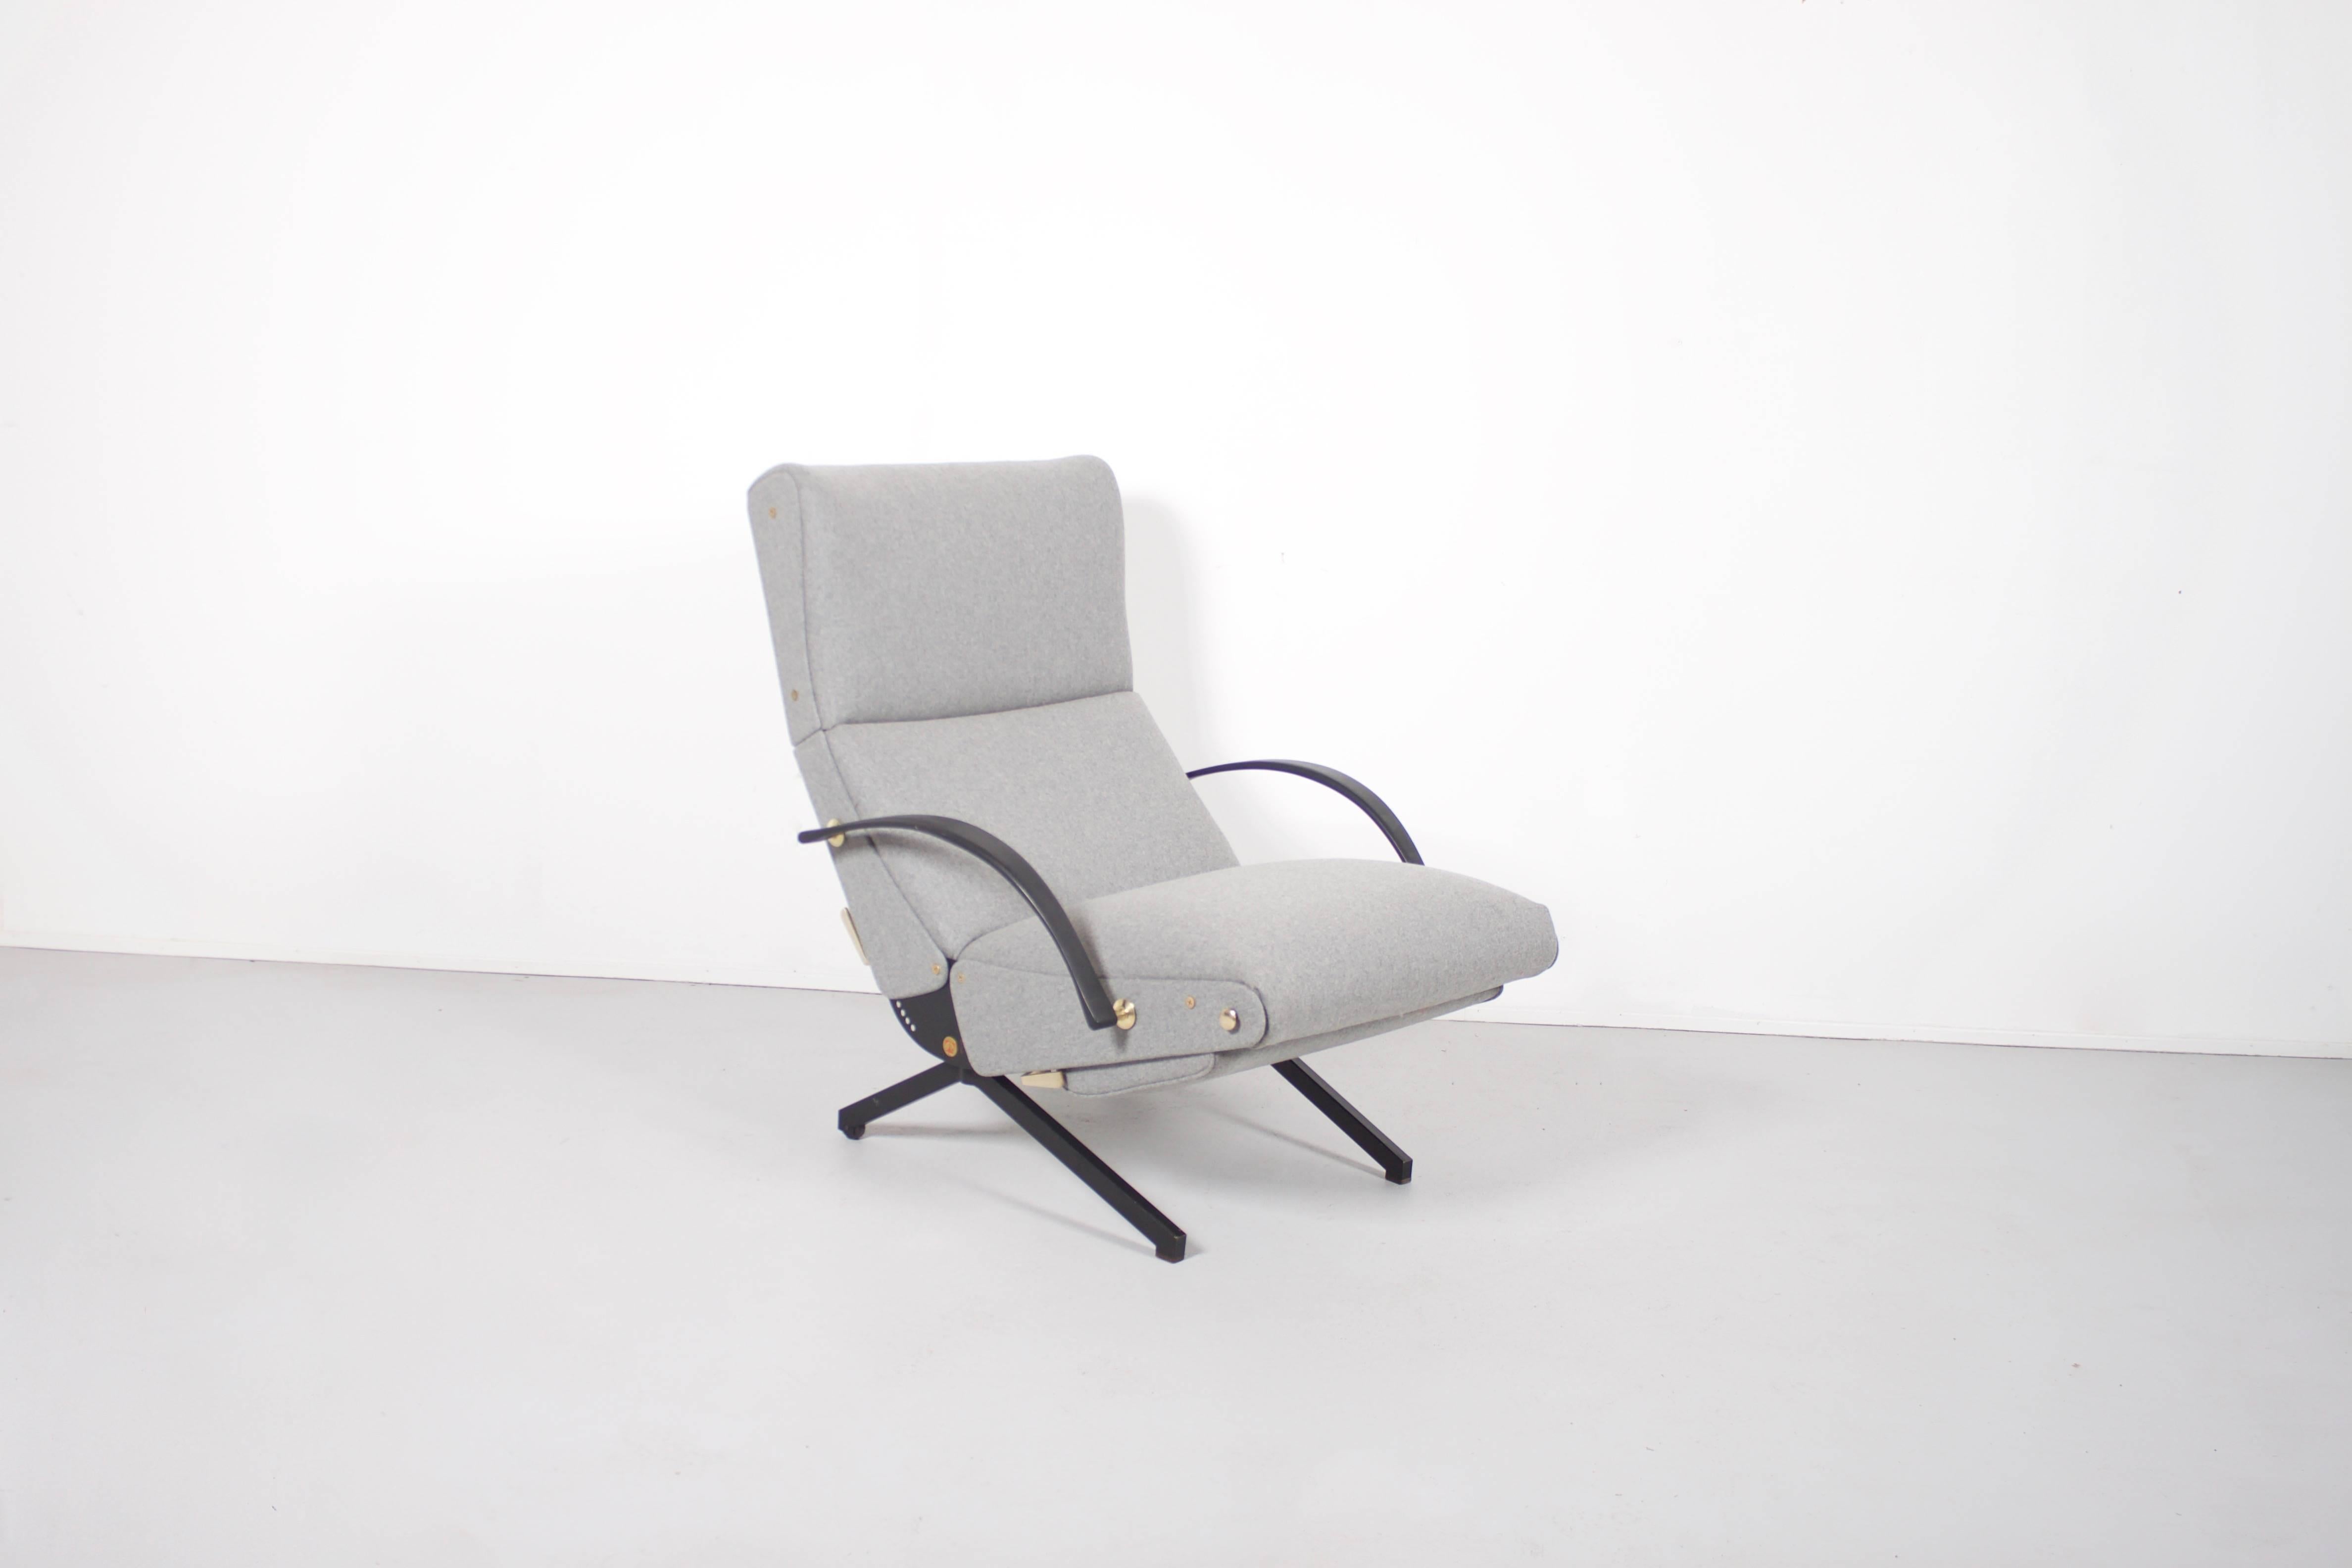 Mid-Century Modern P40 Lounge Chair by Osvaldo Borsani for Tecno with New Upholstery, 1954